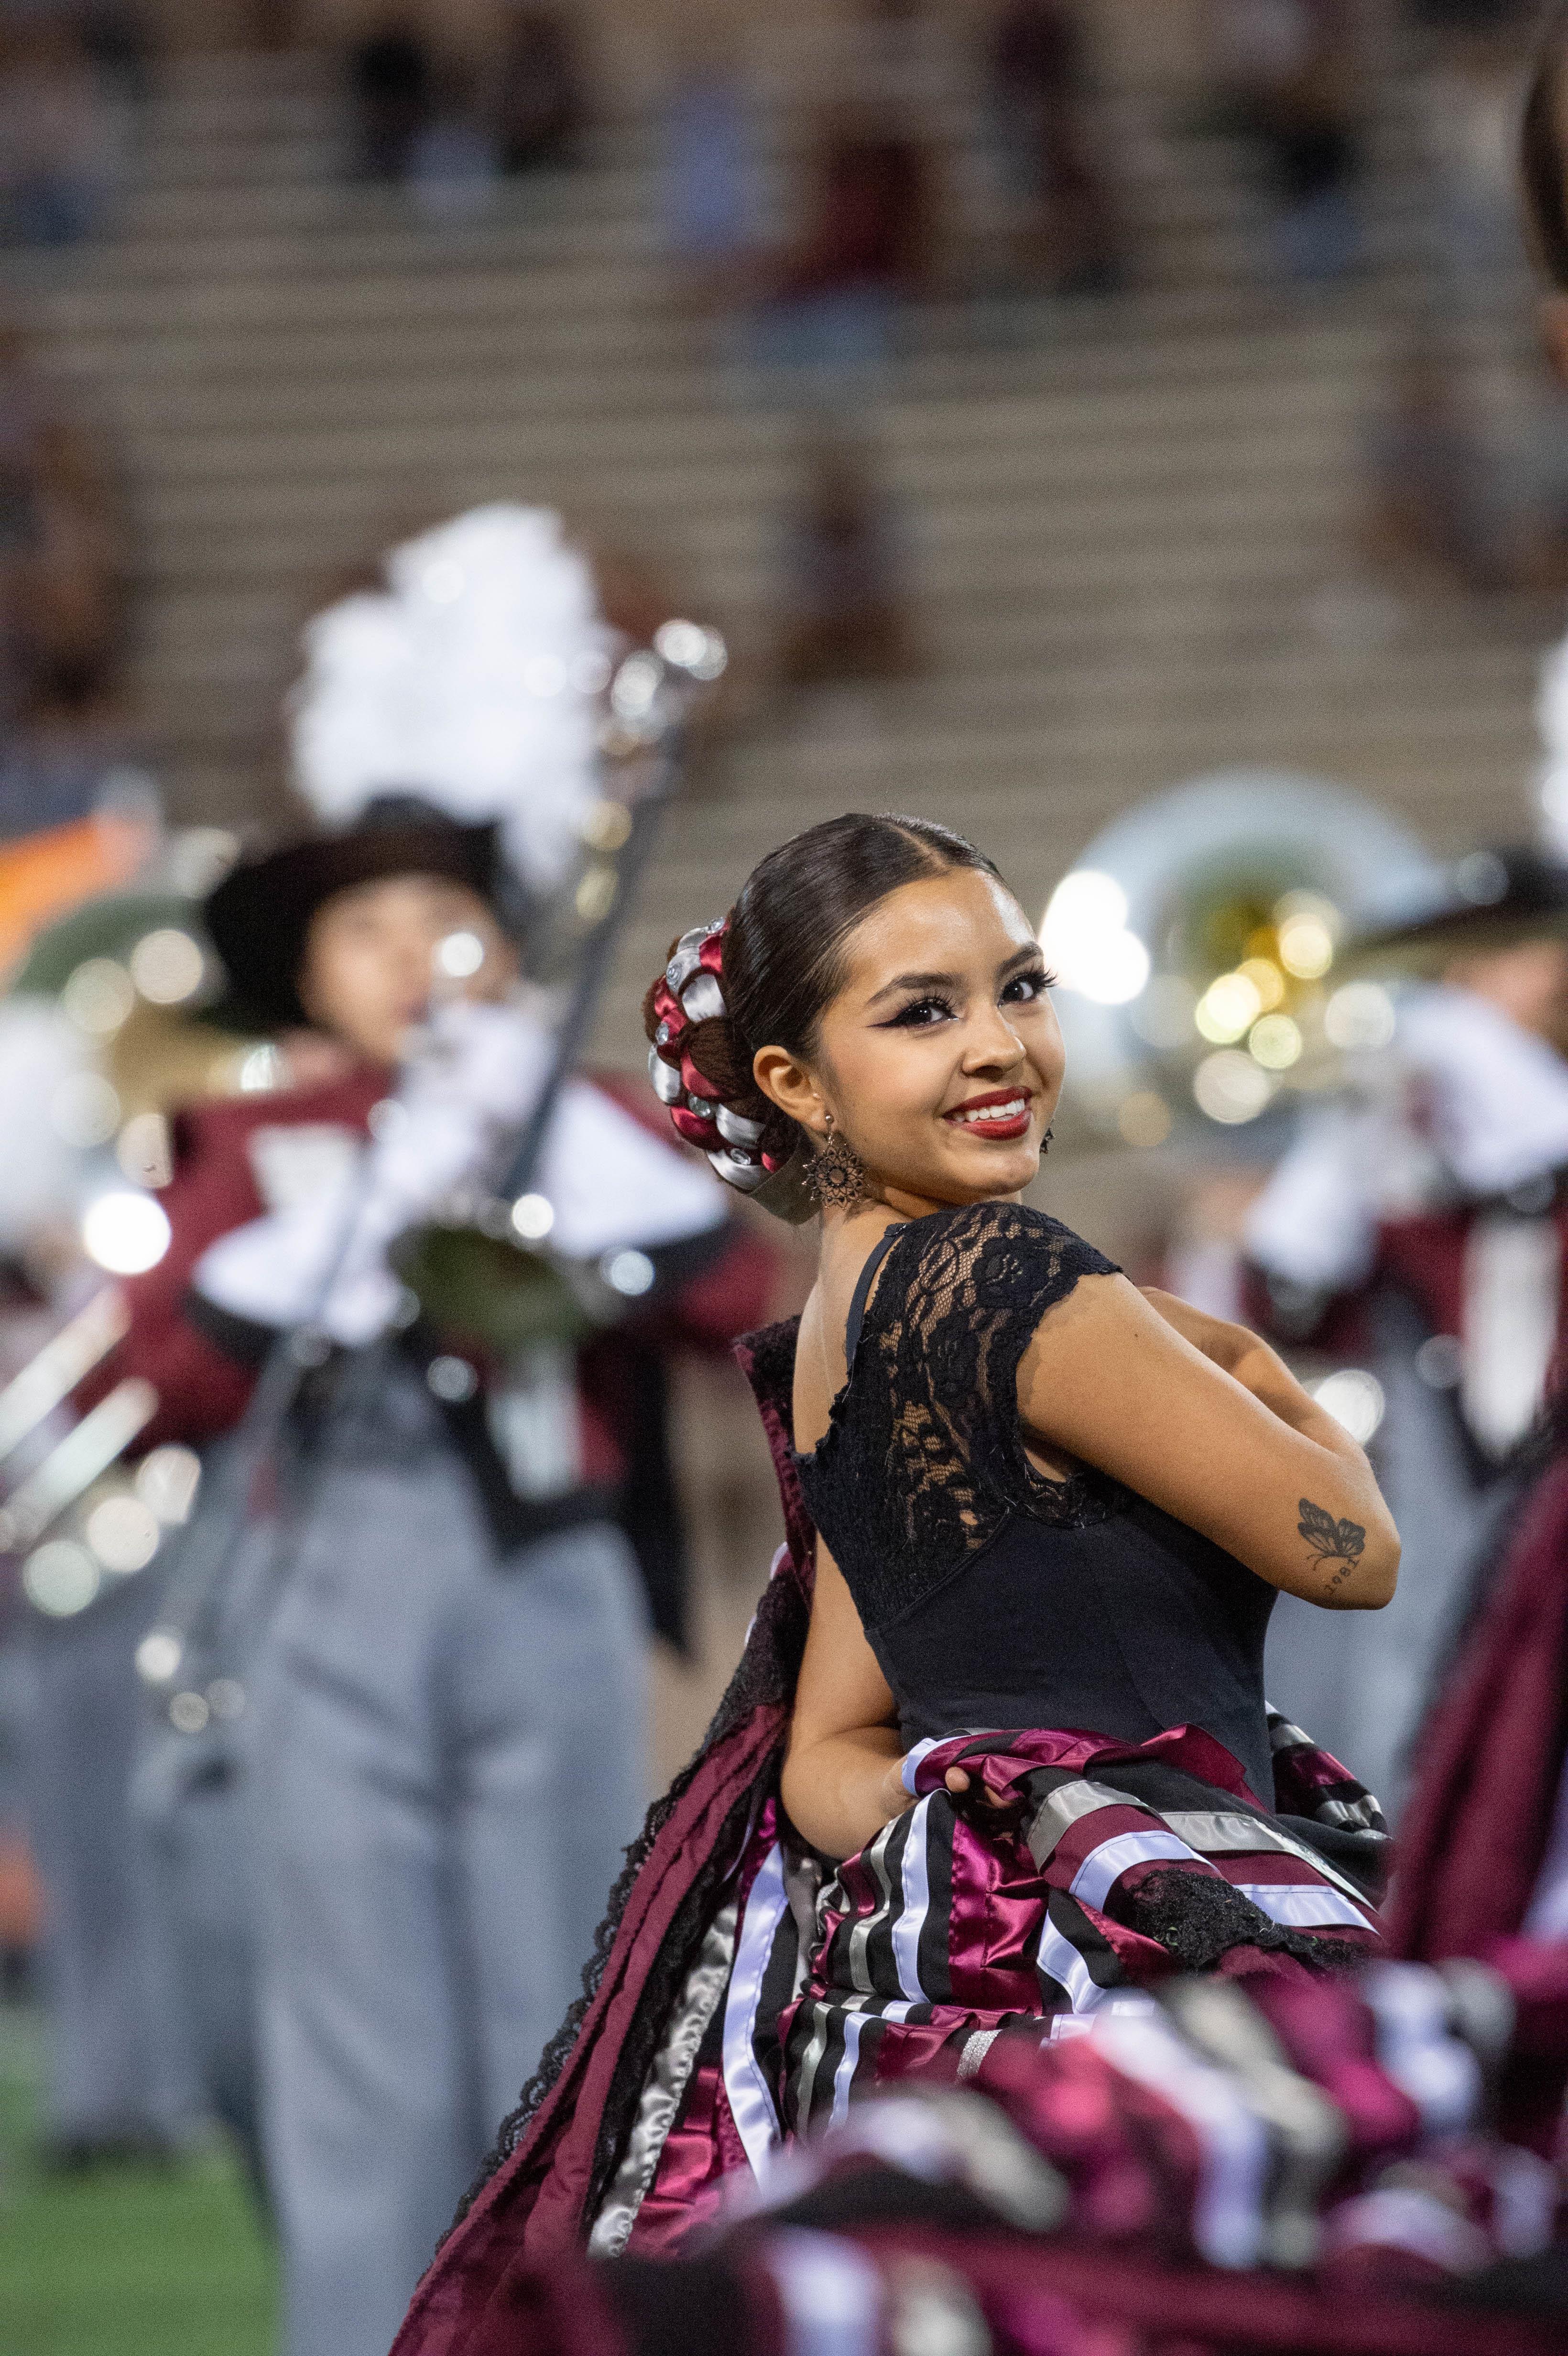 NMSU’s Pride adds ballet folklórico, mariachi to highlight Mexican traditions